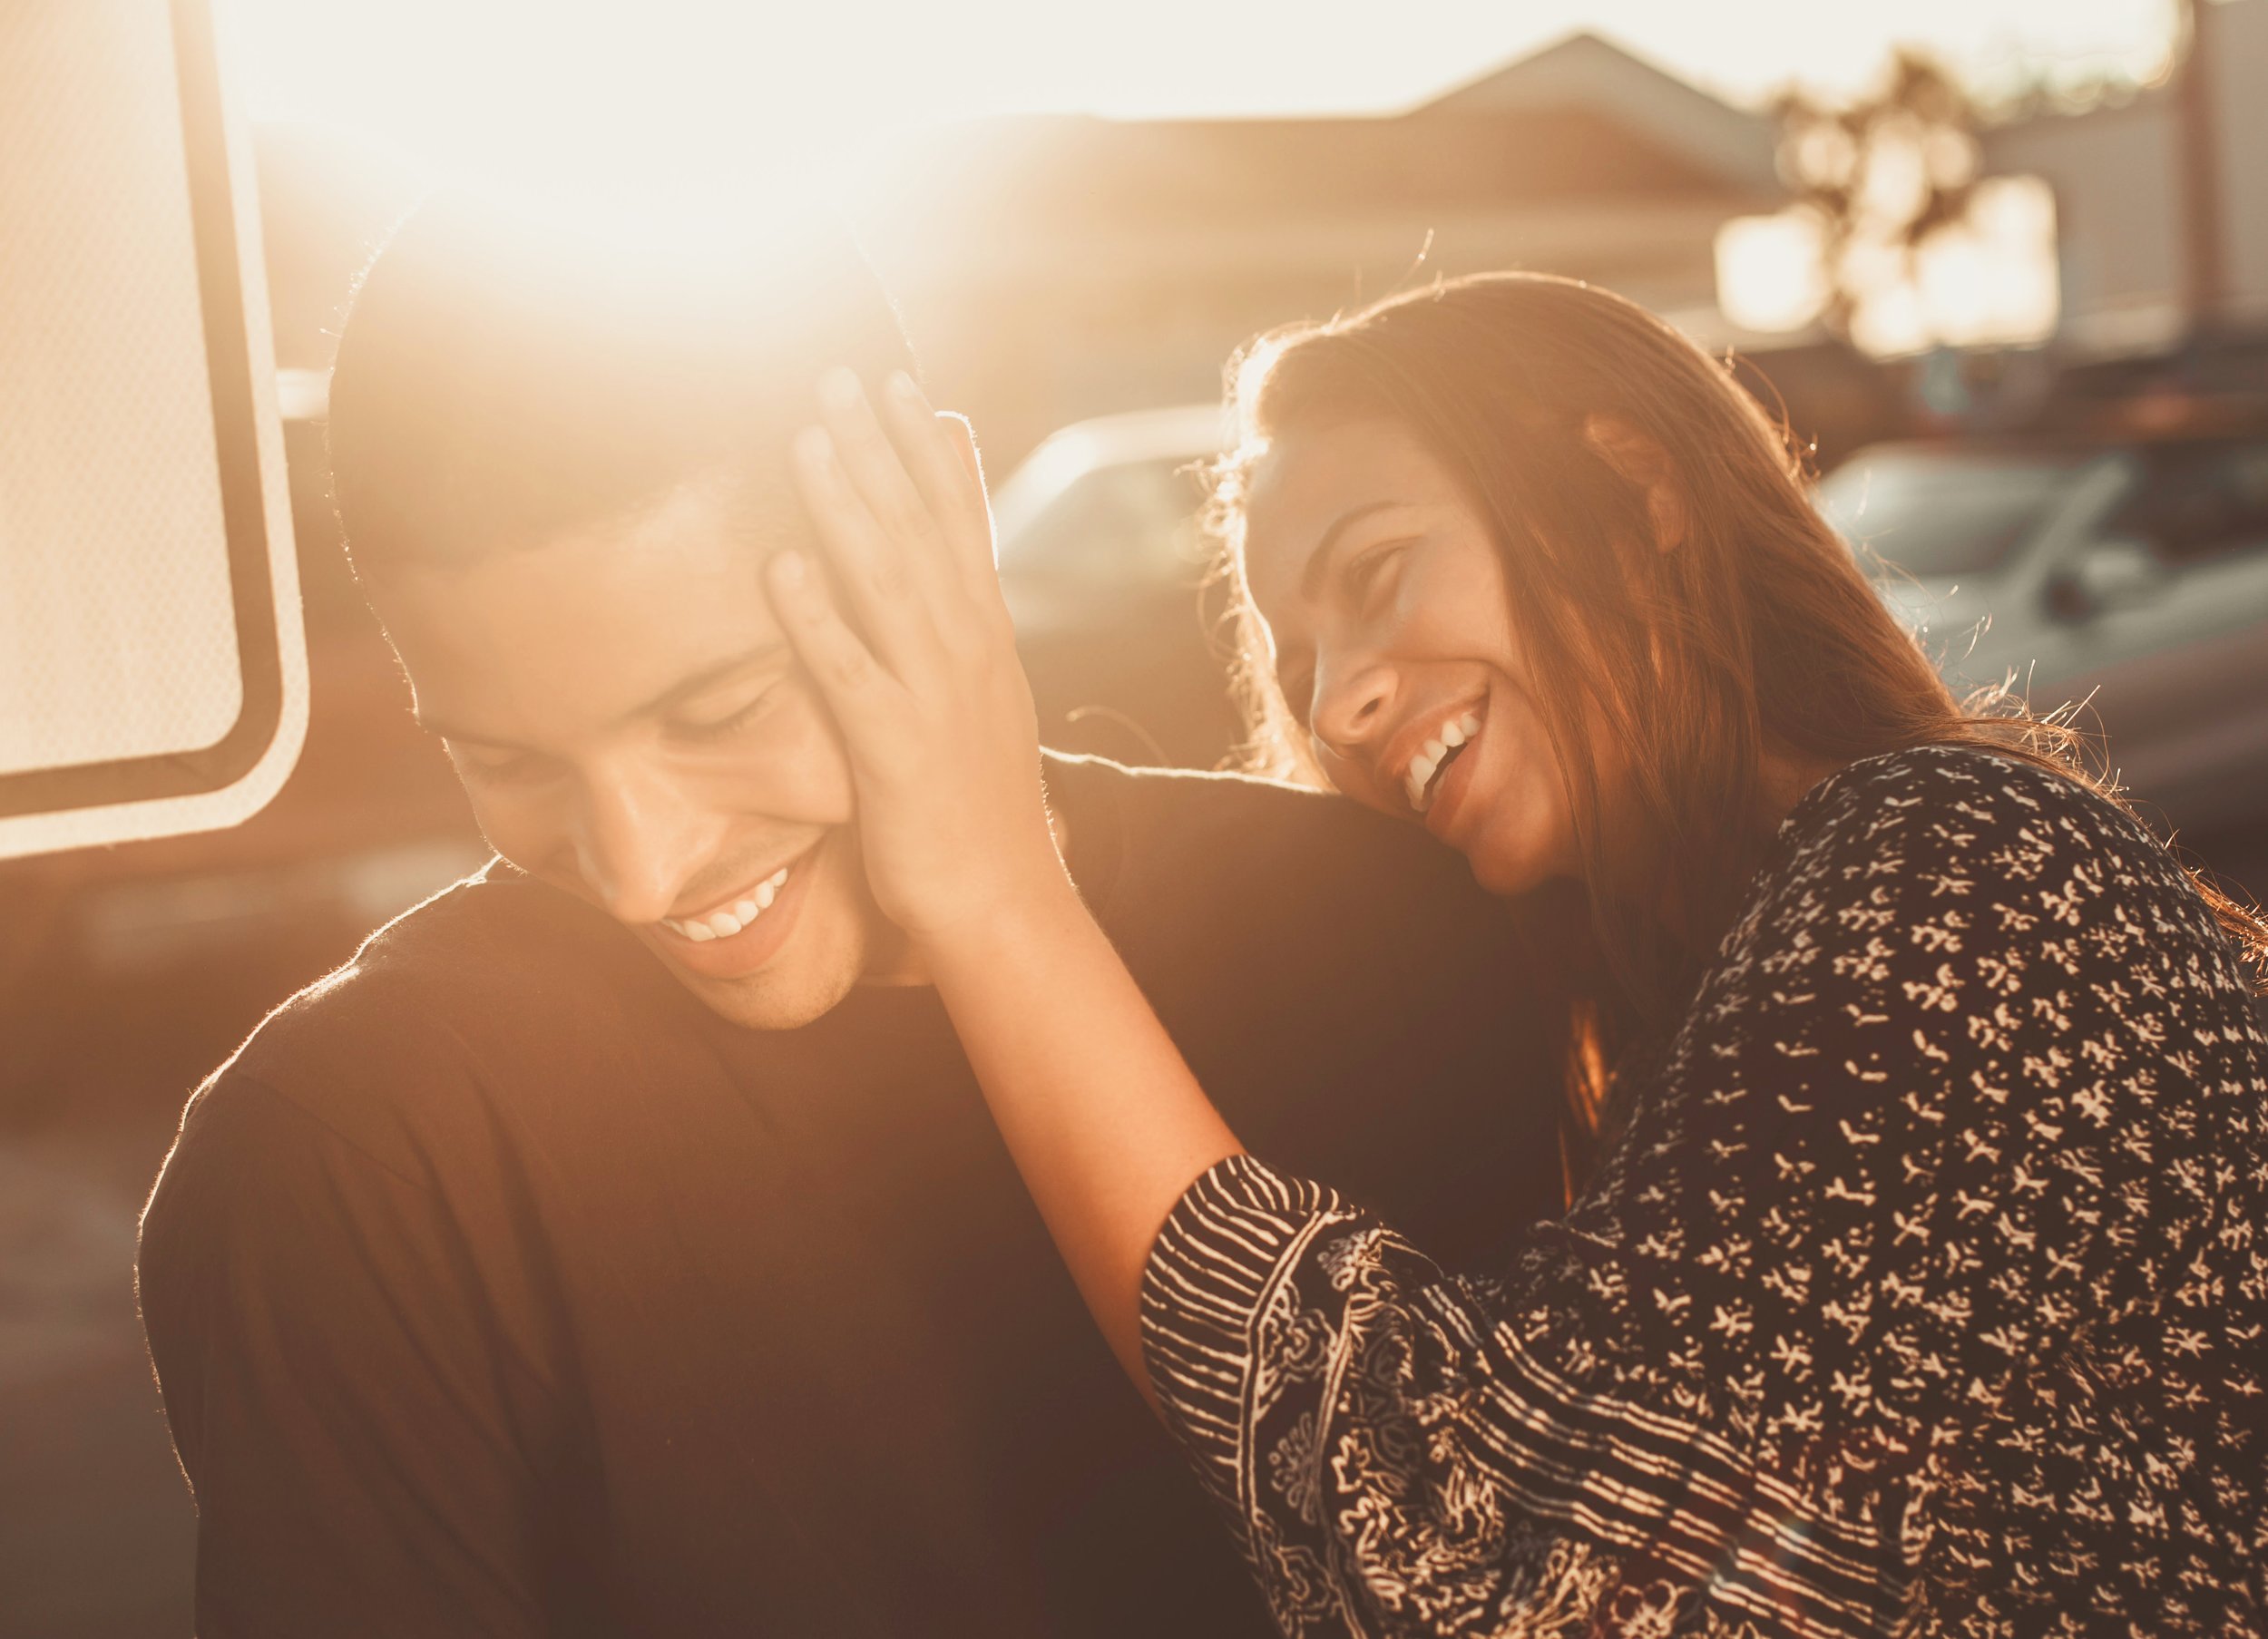 14 Lessons in Love I Wish I'd Learned Sooner